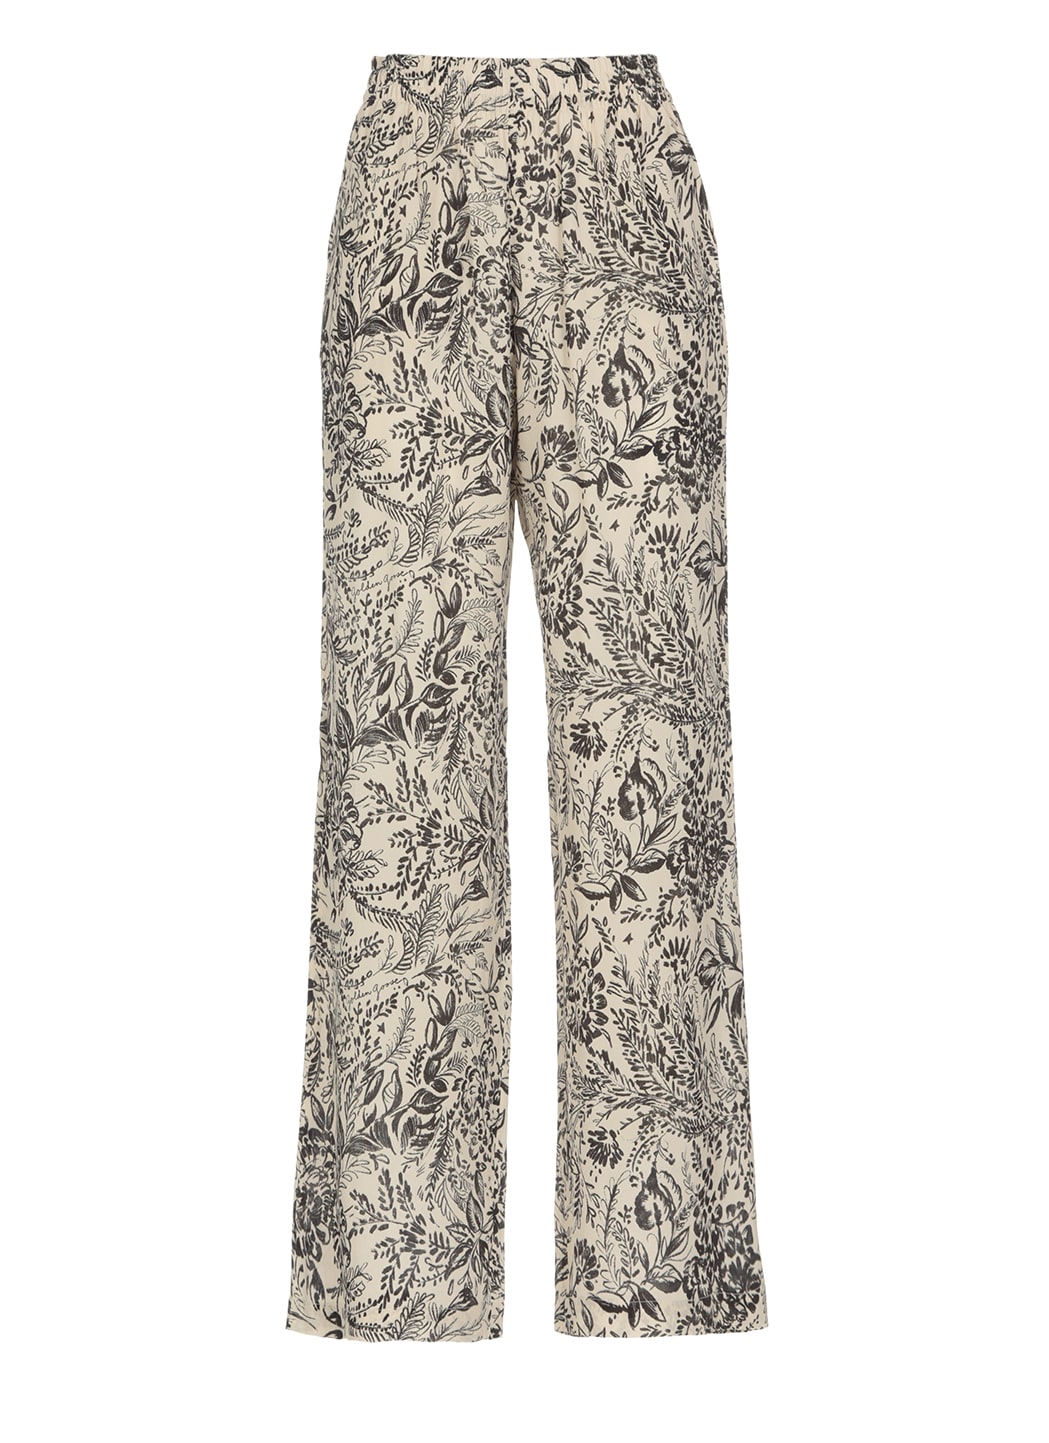 GOLDEN GOOSE BRITTANY TROUSERS